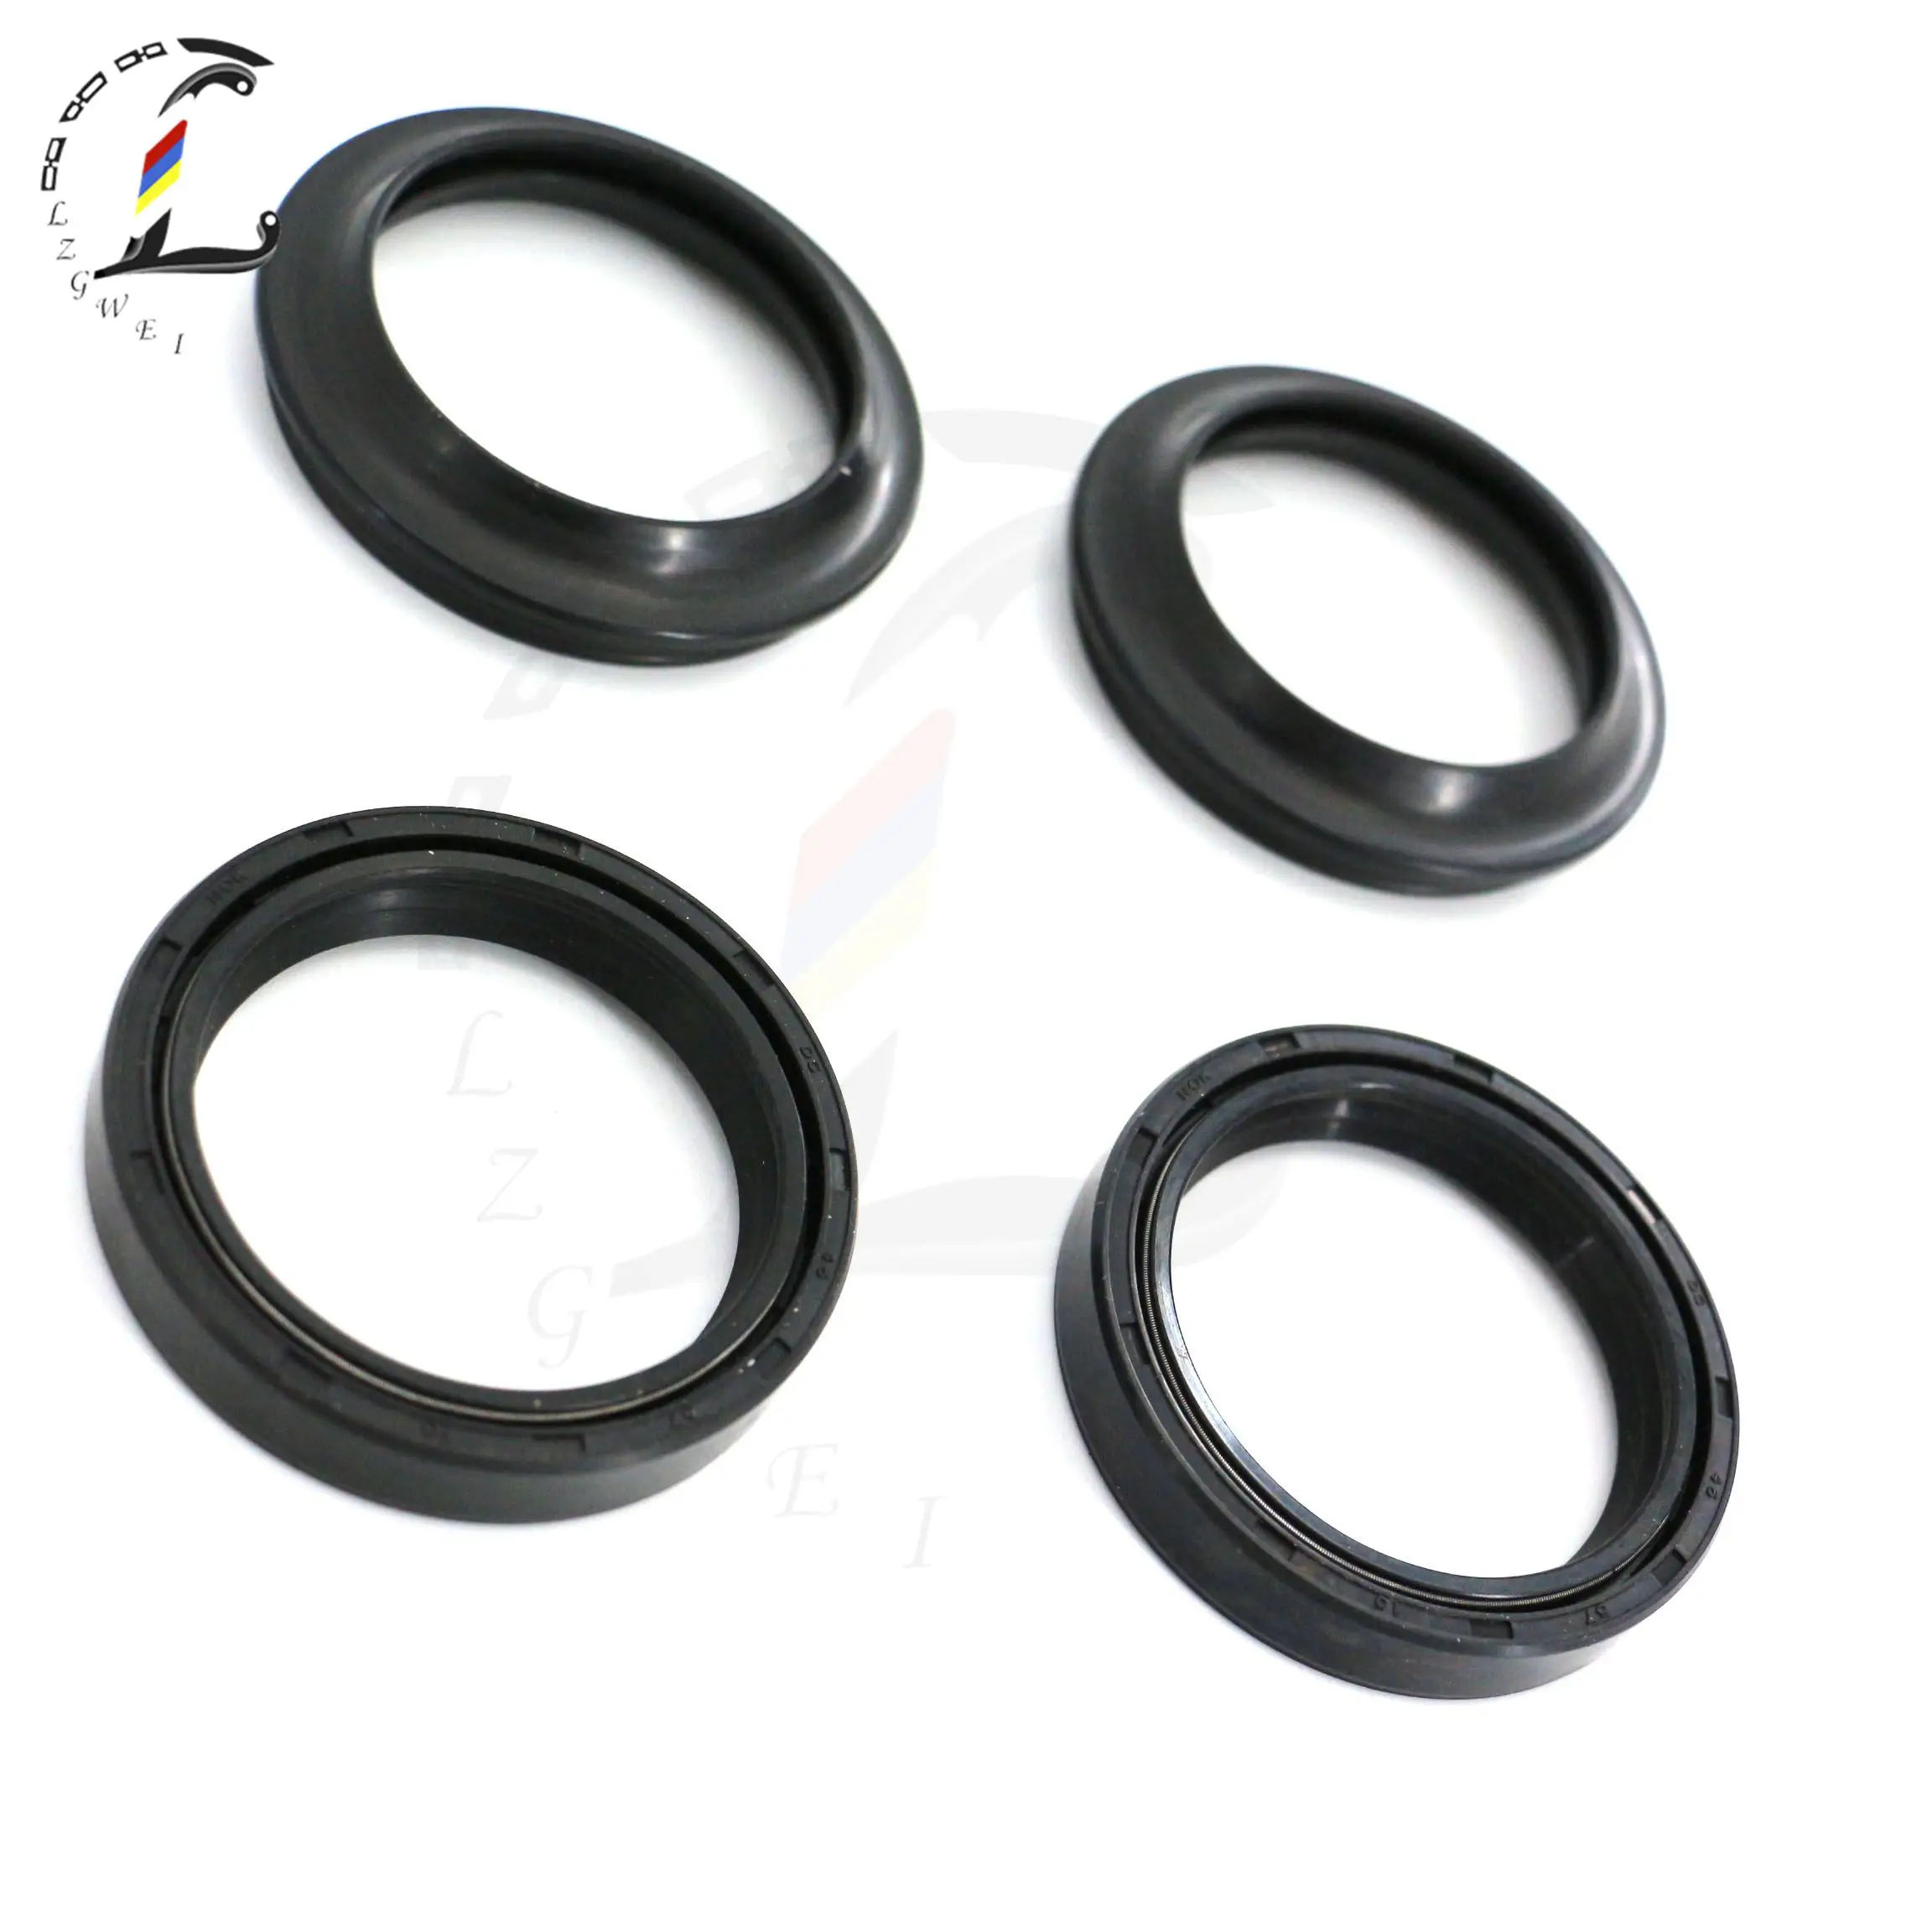 

Motorcycle Oil Seal Front Fork Absorber Dust Seals Accessories For Yamaha FZ 09 FZ 07 MT 07 09 YZF R1 YZF R6 R3 600R 750R SP FZR